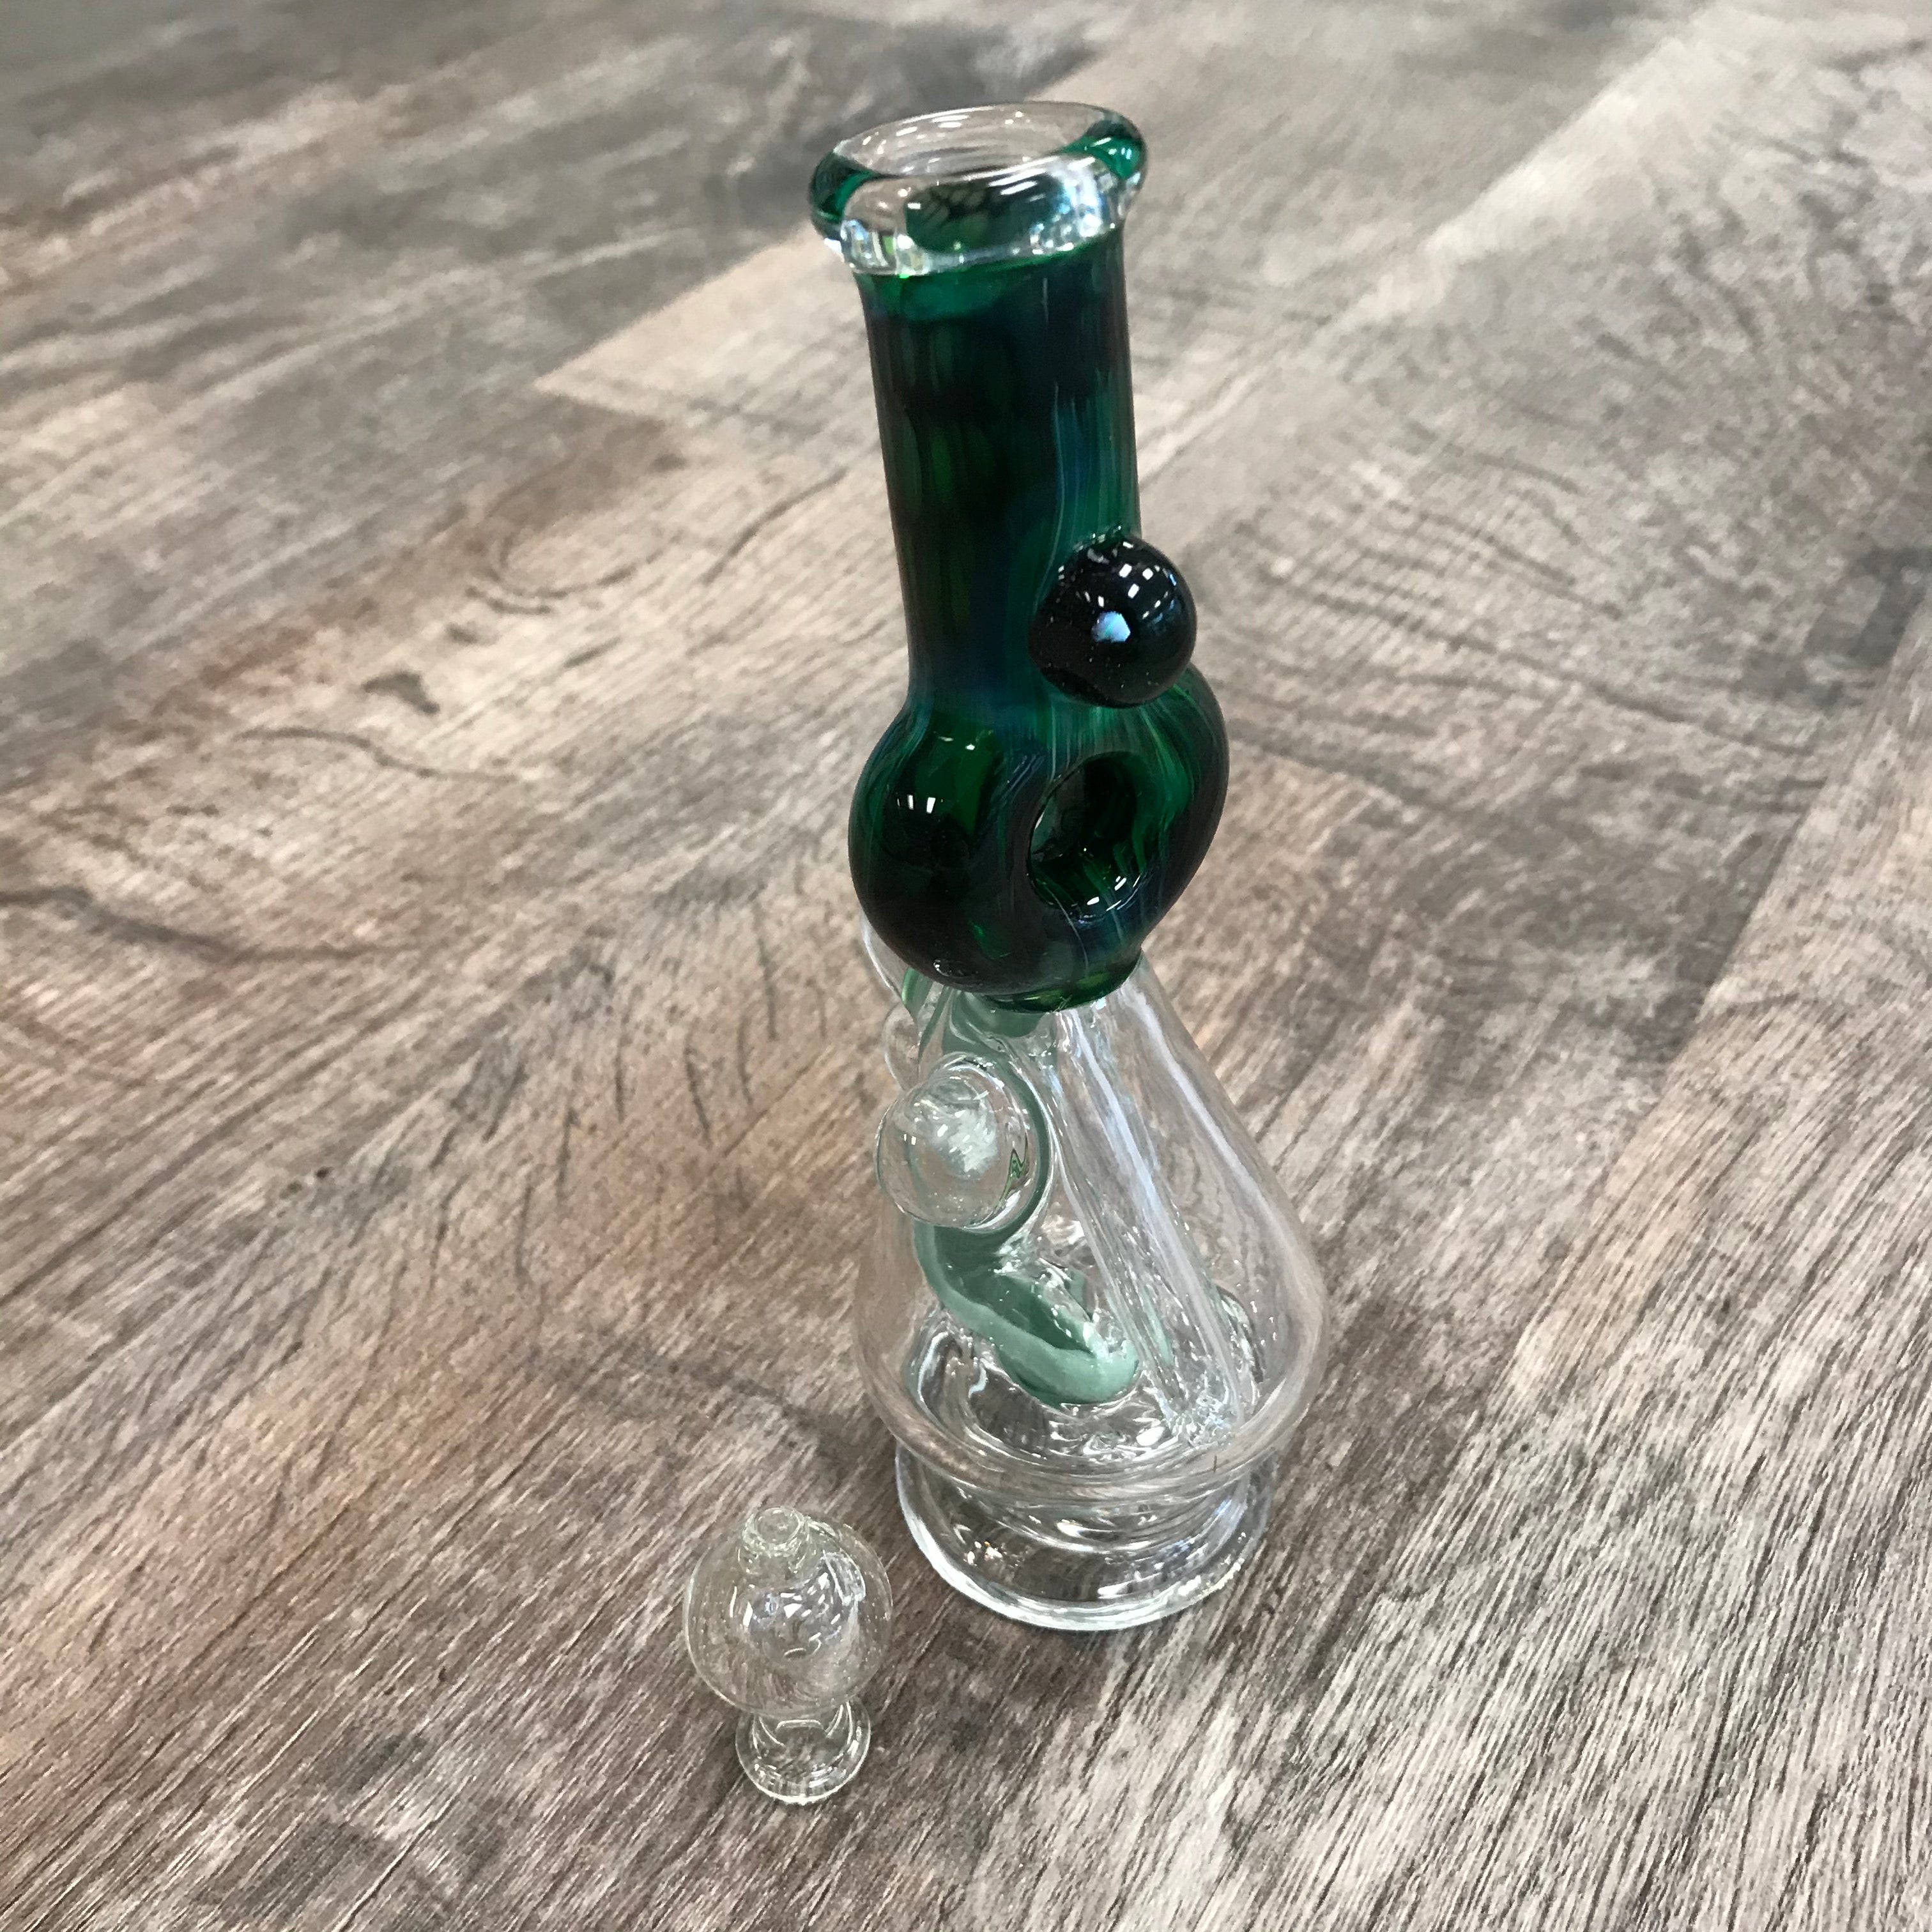 First custom glass! chugs way better. it's a shame puff co gives us such  lazy subpar glass. : r/puffco